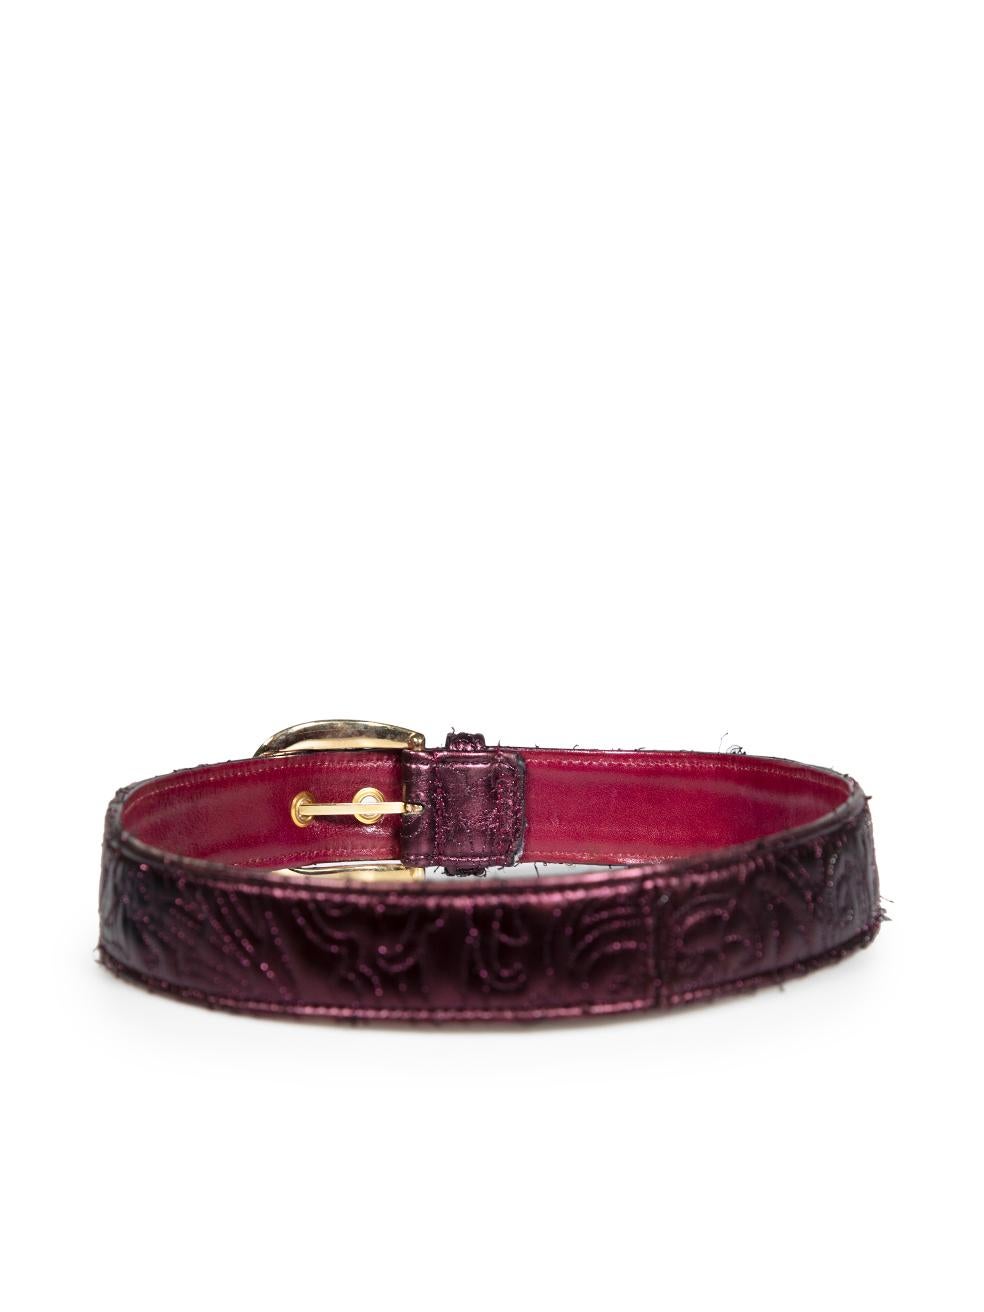 Etro Purple Leather Metallic Quilted Belt In Excellent Condition For Sale In London, GB